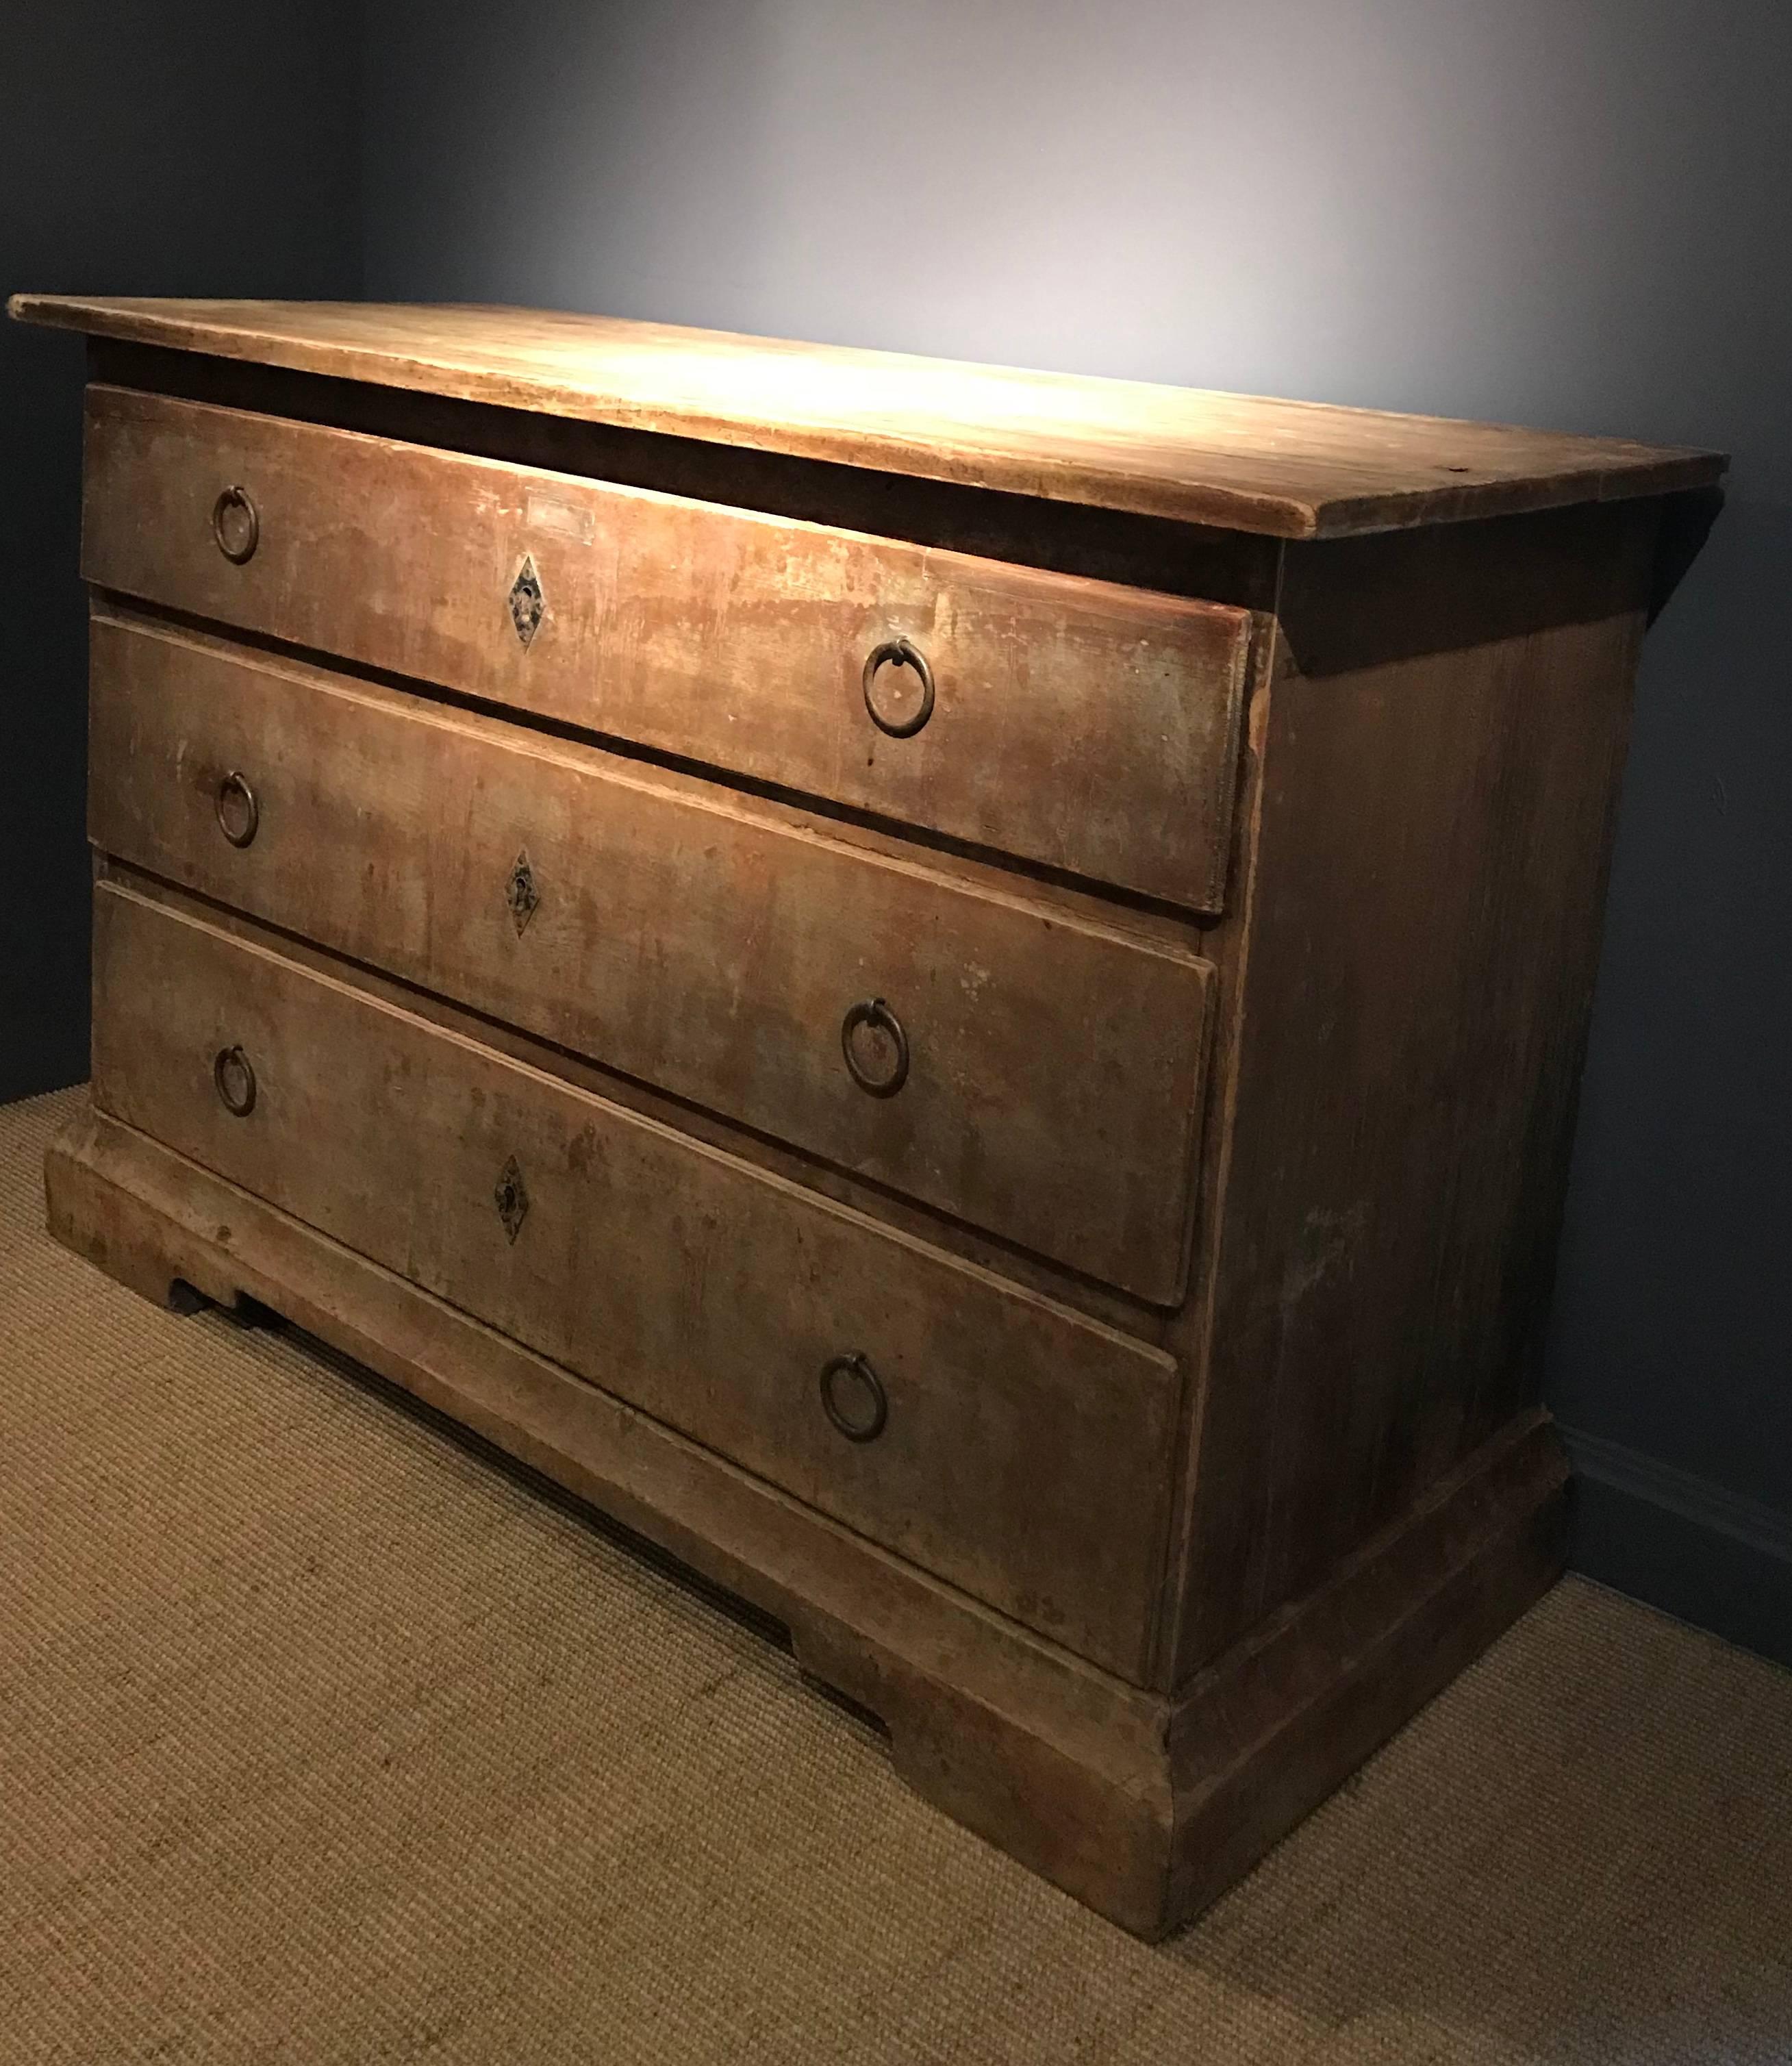 Very elegant and sober Chest of Drawers,Sweden 19th Century,3 drawers
the bleached pine has a very  good patina